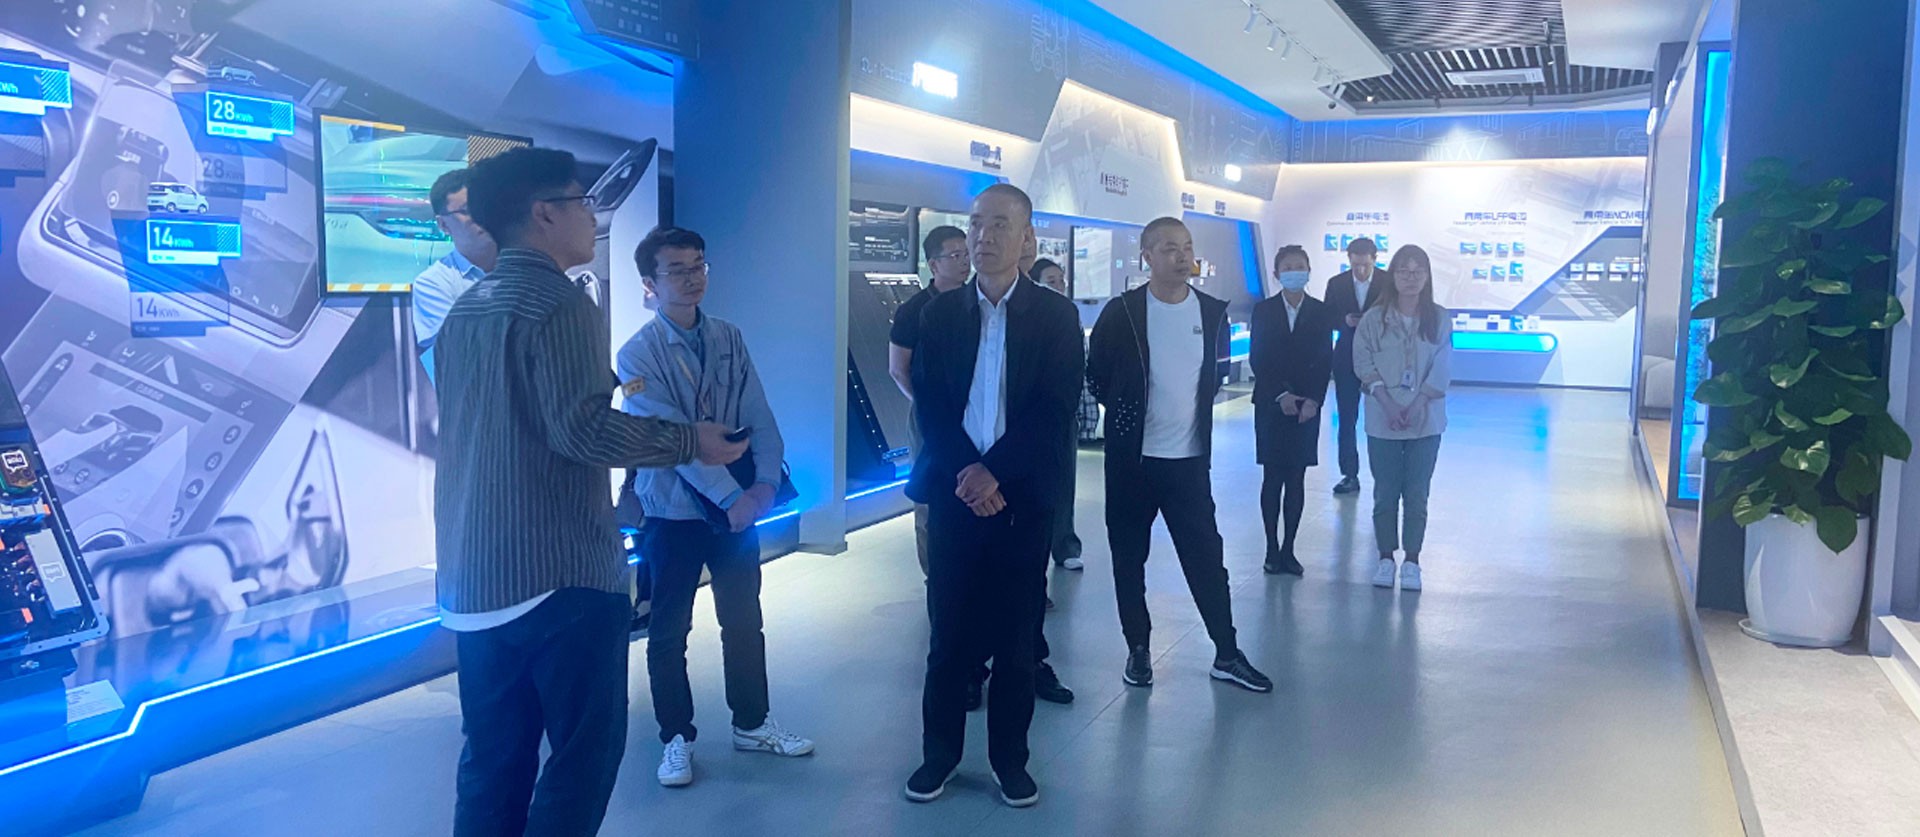 [visit and exchange] qiu yue, secretary of the party committee of zhejiang provincial intellectual property protection center, and his party visited rept battero for guidance